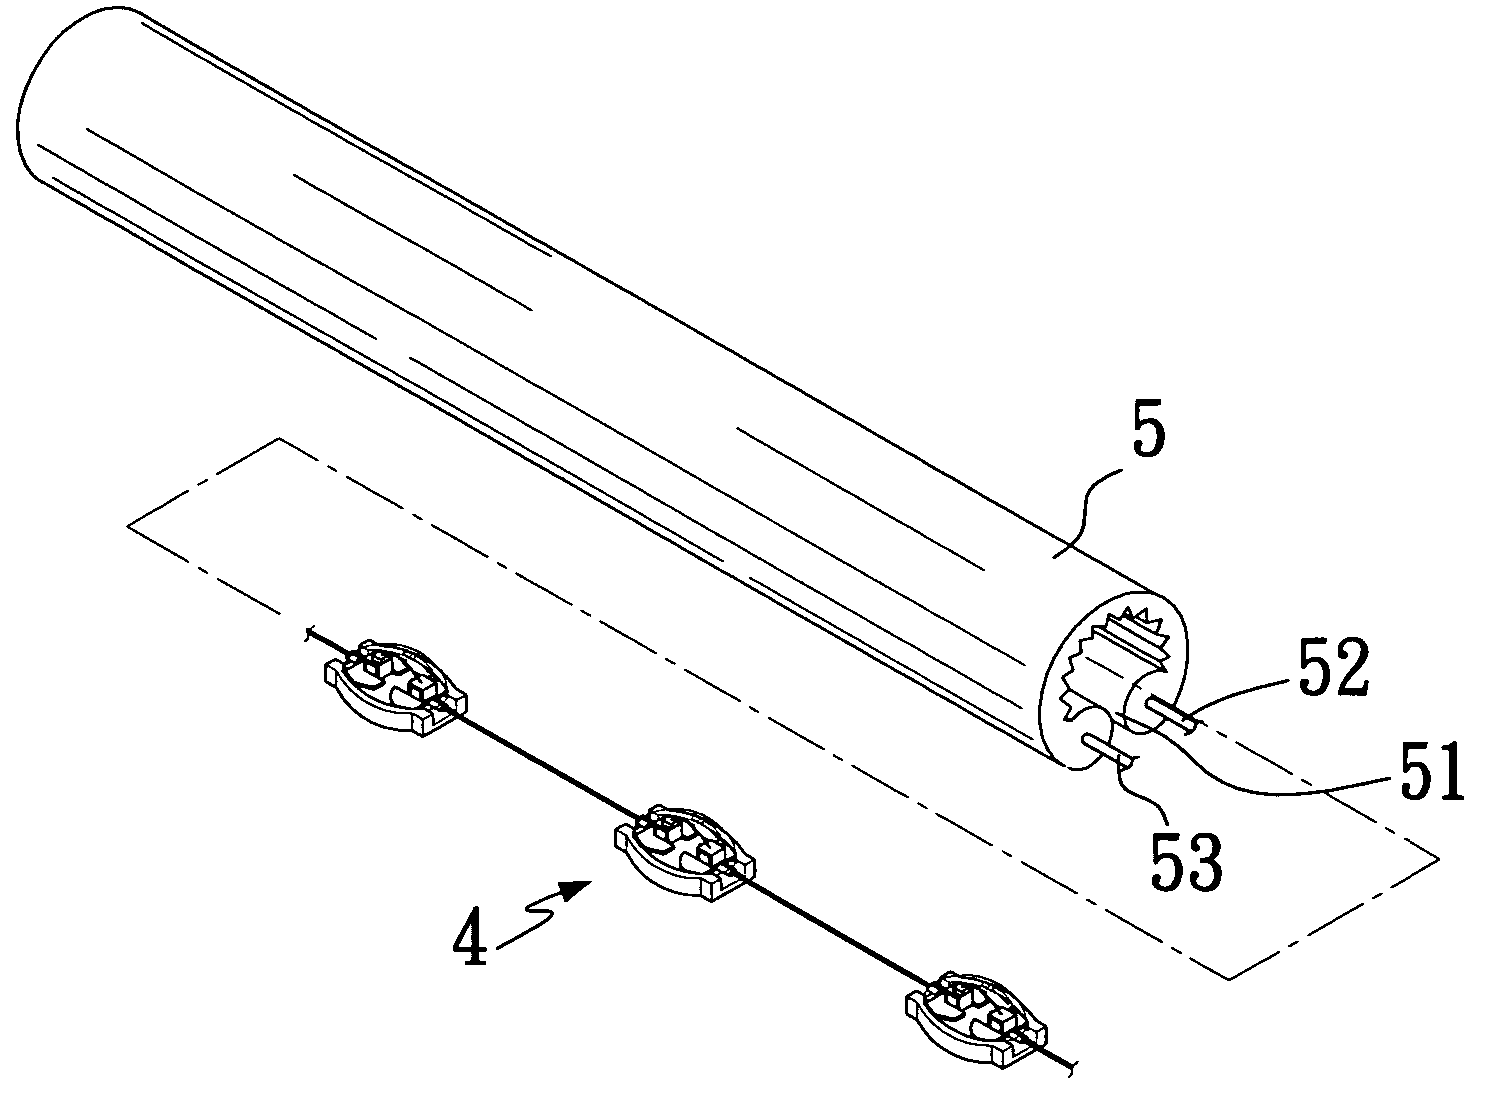 Method of producing an LED rope light